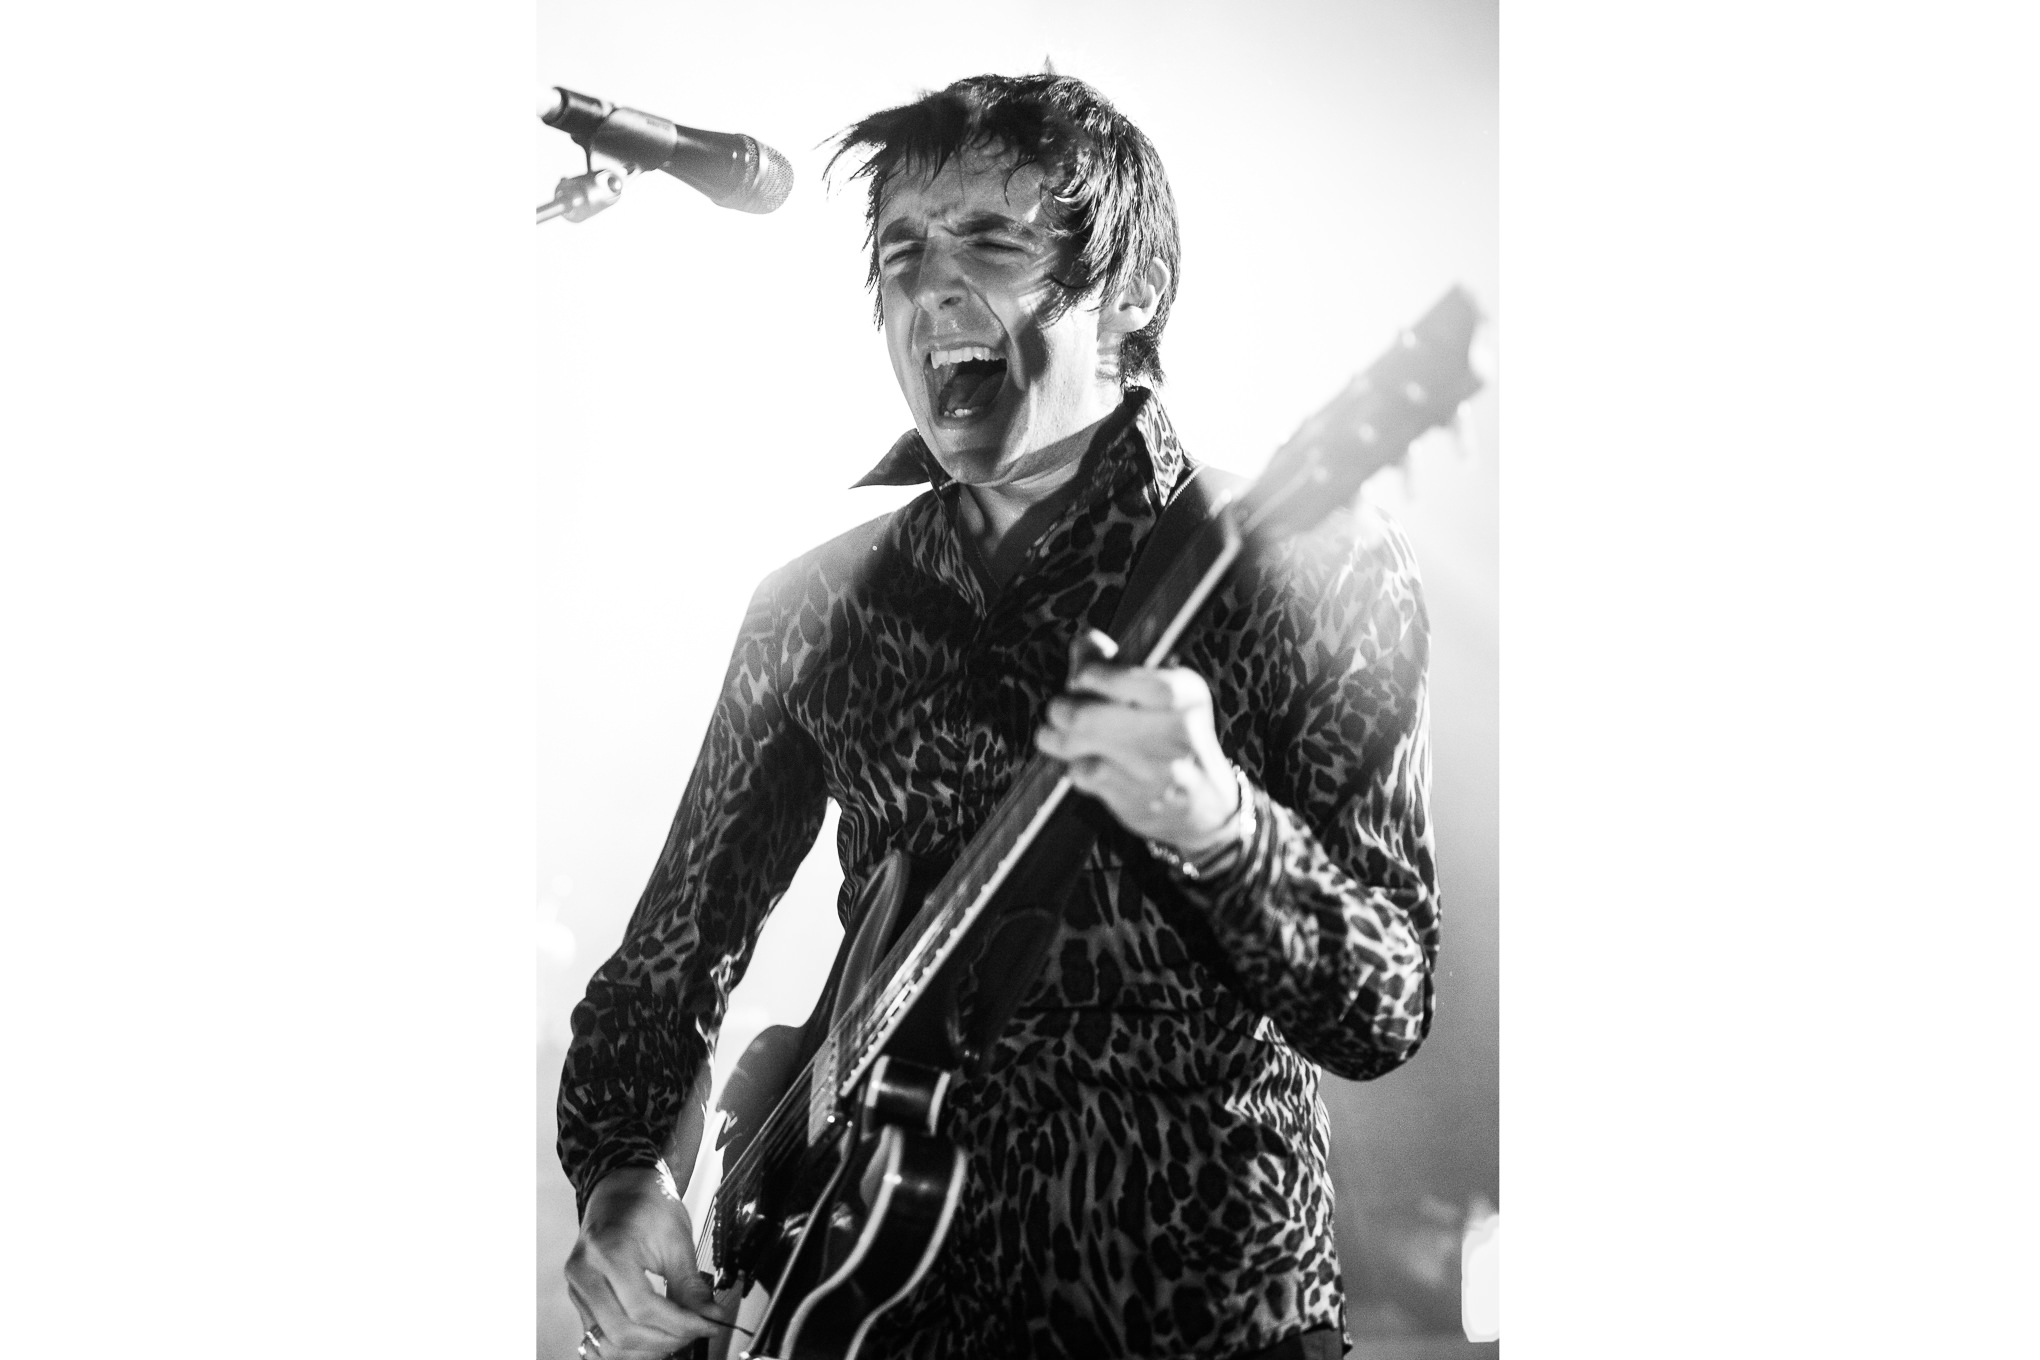  Miles Kane. I have no memory of this gig at all, but I quite like this shot, missed focus &amp;&nbsp;all. 